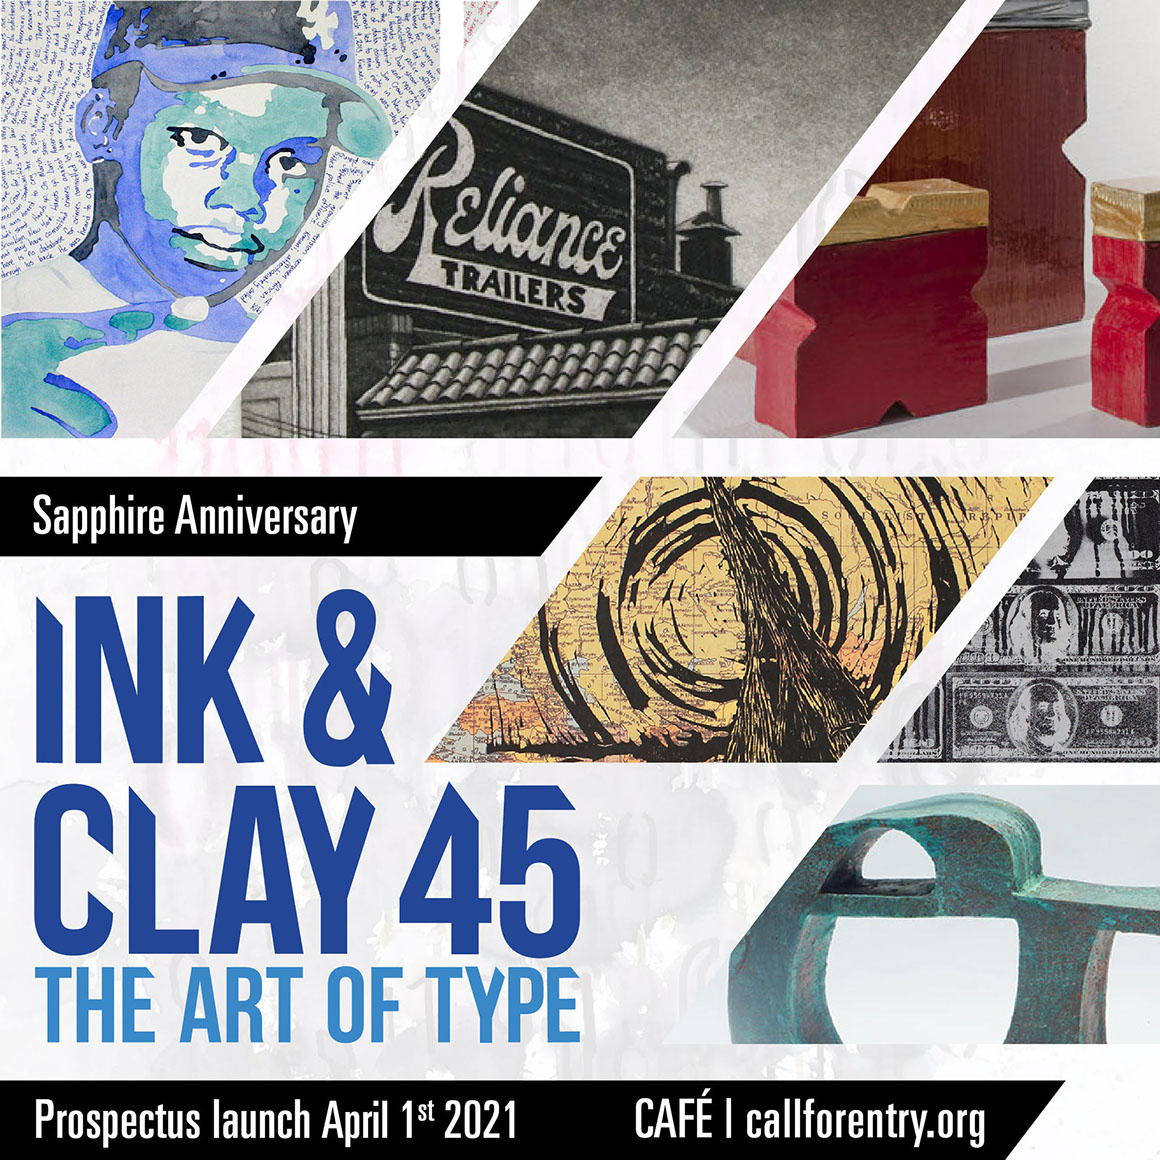 Ink & Clay 45 Prospectus Launch Banner, Includes 6 different artworks from past Ink & Clay shows. 